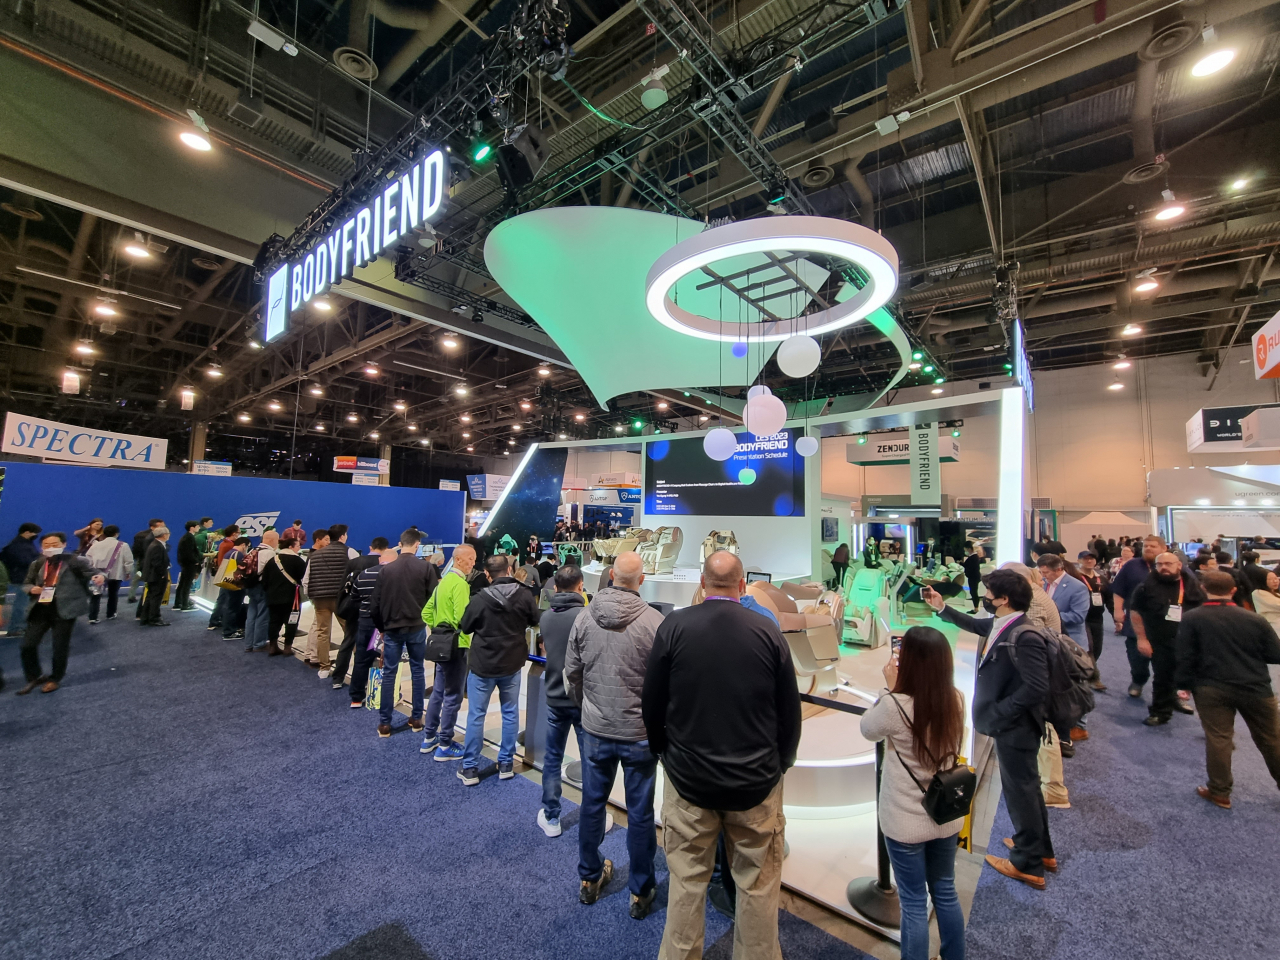 People line up in front of Bodyfriend's exhibition at CES 2023 to try out the company's massage chair on Friday. (Kan Hyeong-woo/The Korea Herald)